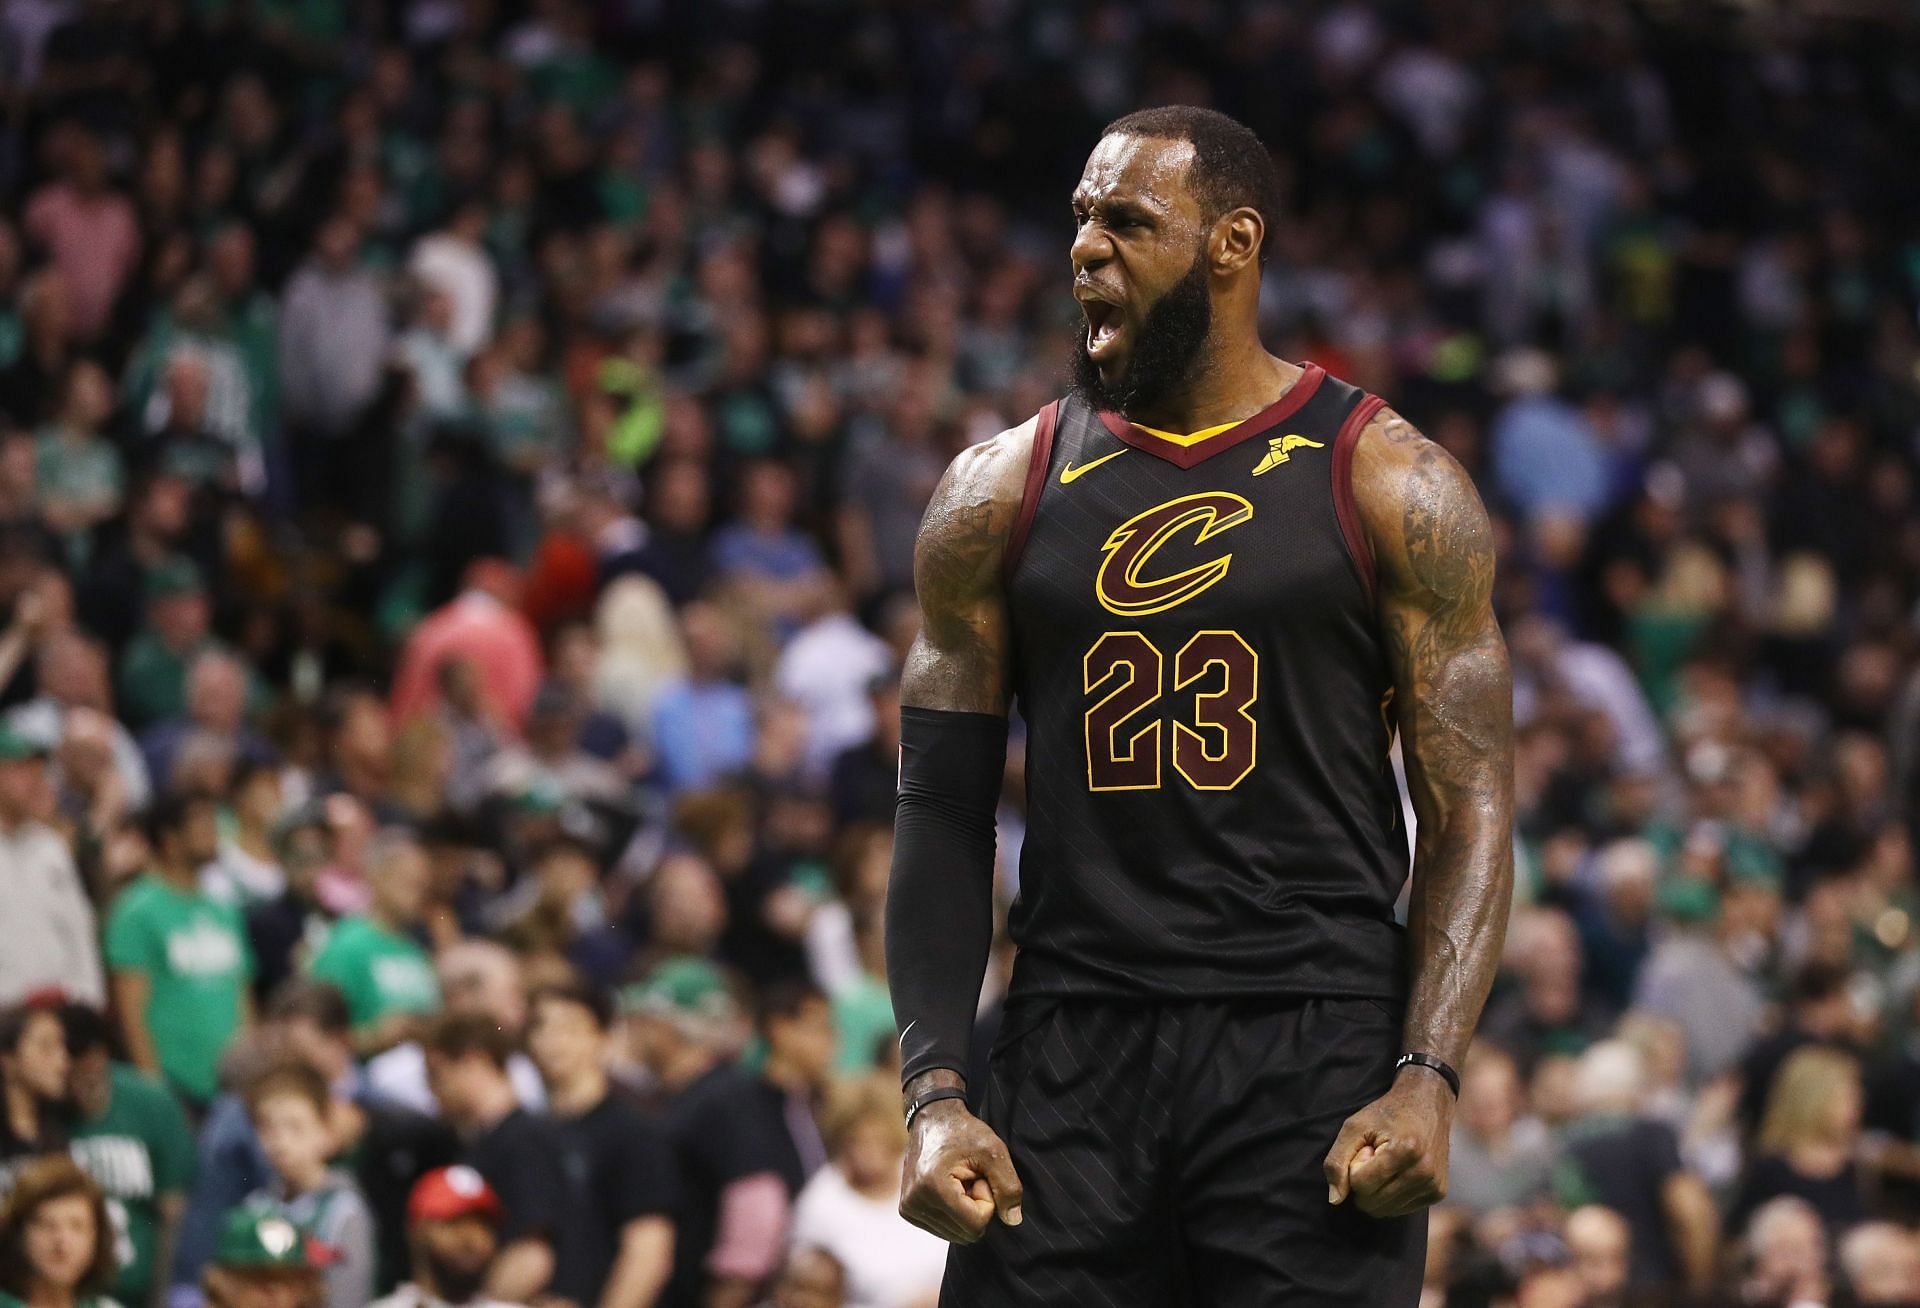 LeBron James of the Cleveland Cavaliers during the 2018 NBA playoffs